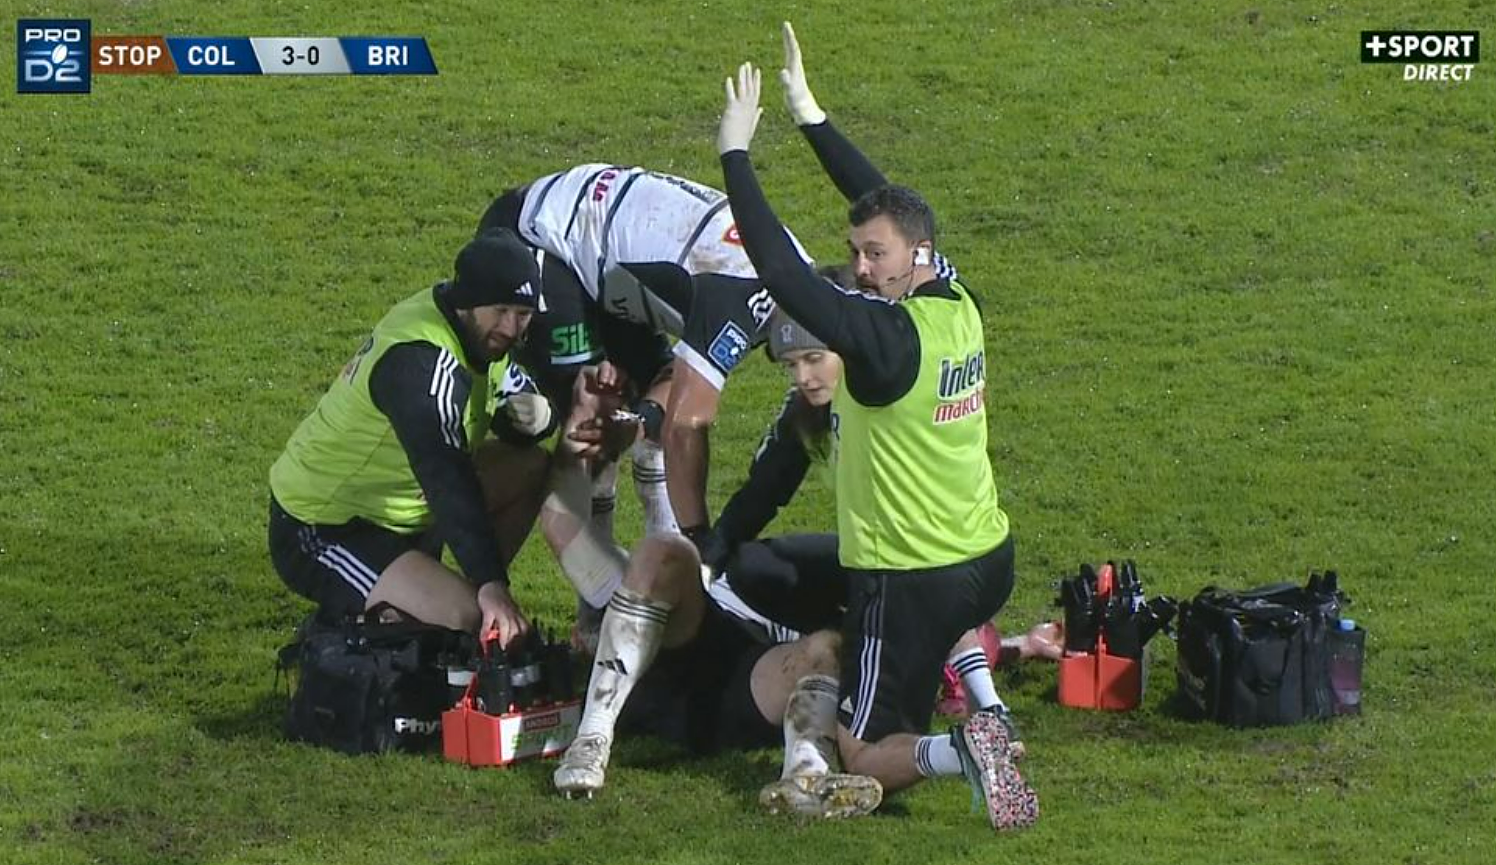 Pro D2: “I hope his career is not over”, the terrible injury of the Brive hooker